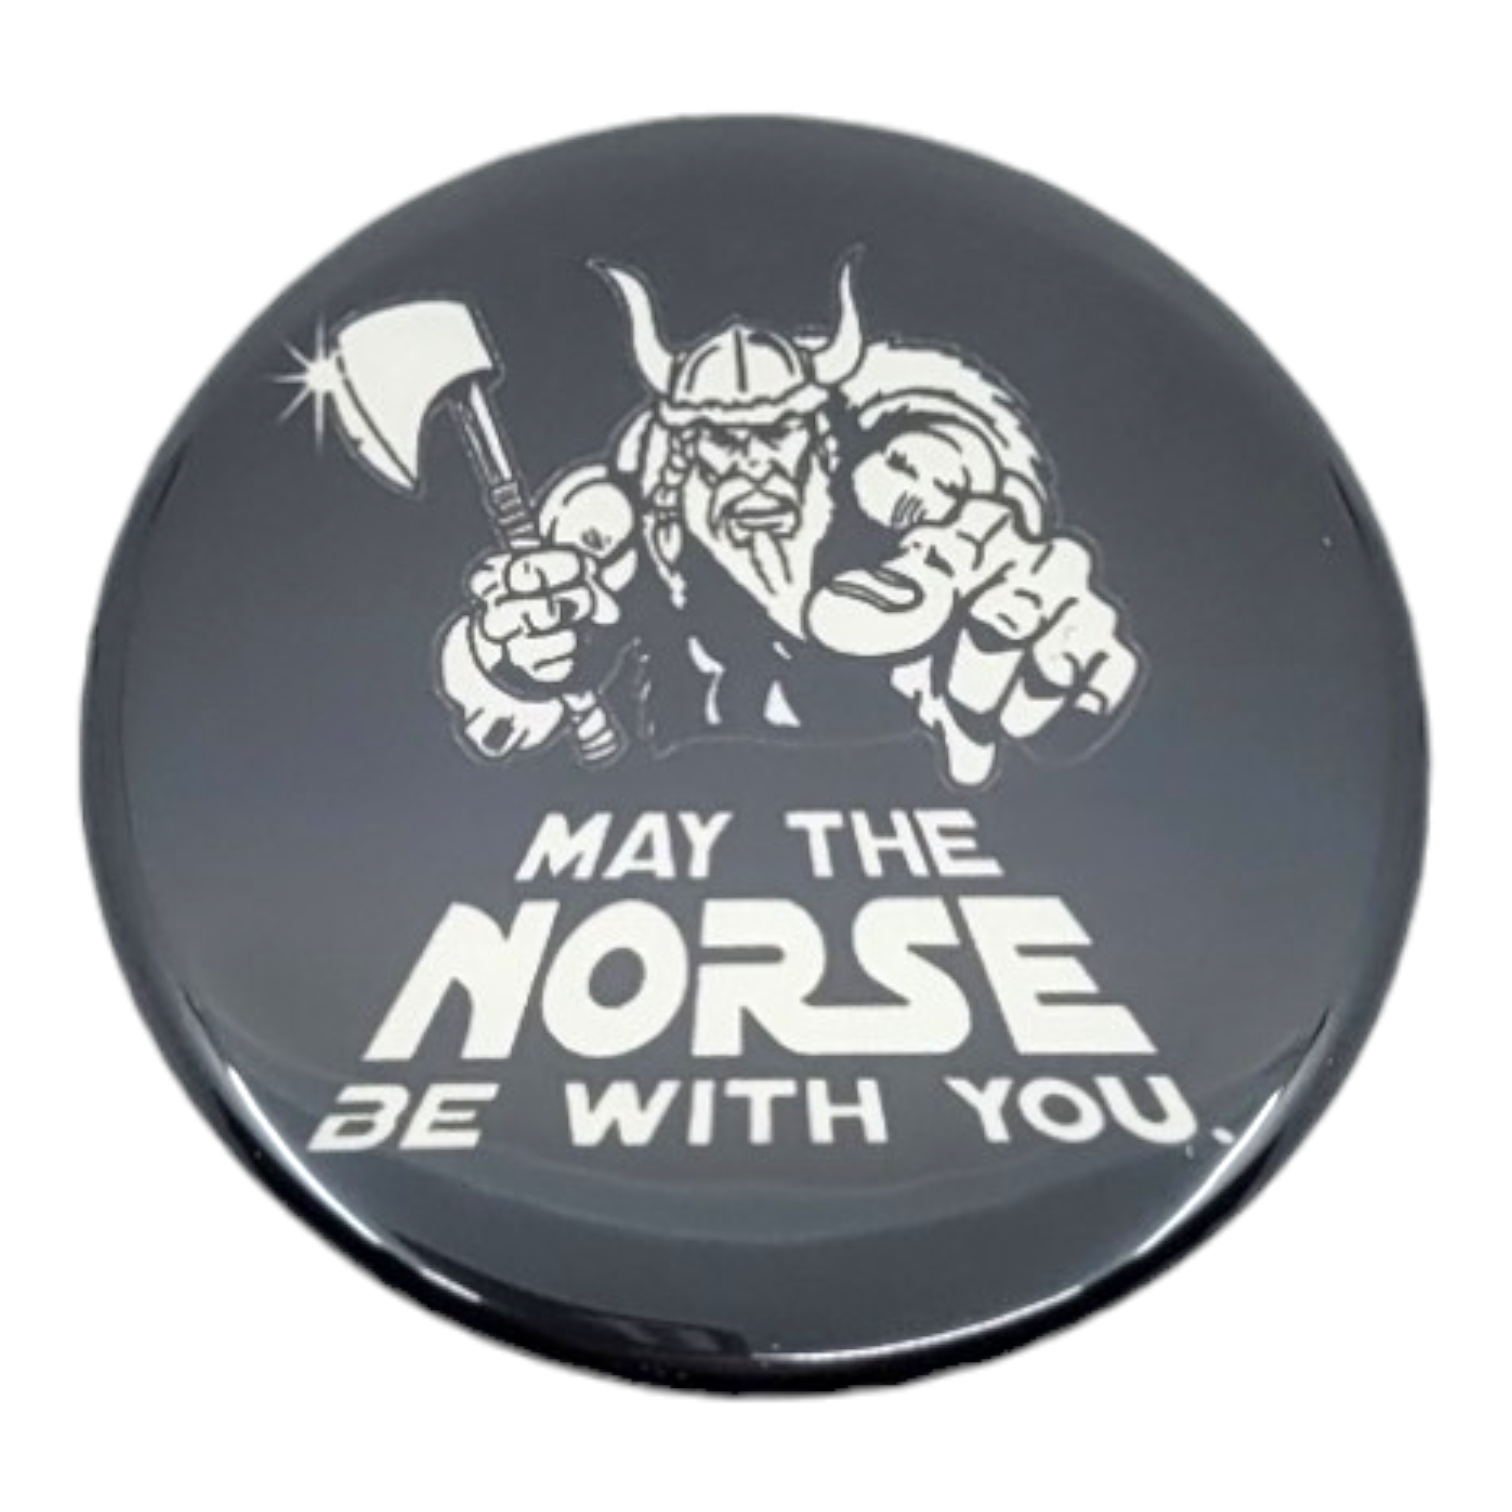 Magnet: "May The Norse Be With You", 2.25" Round Magnet